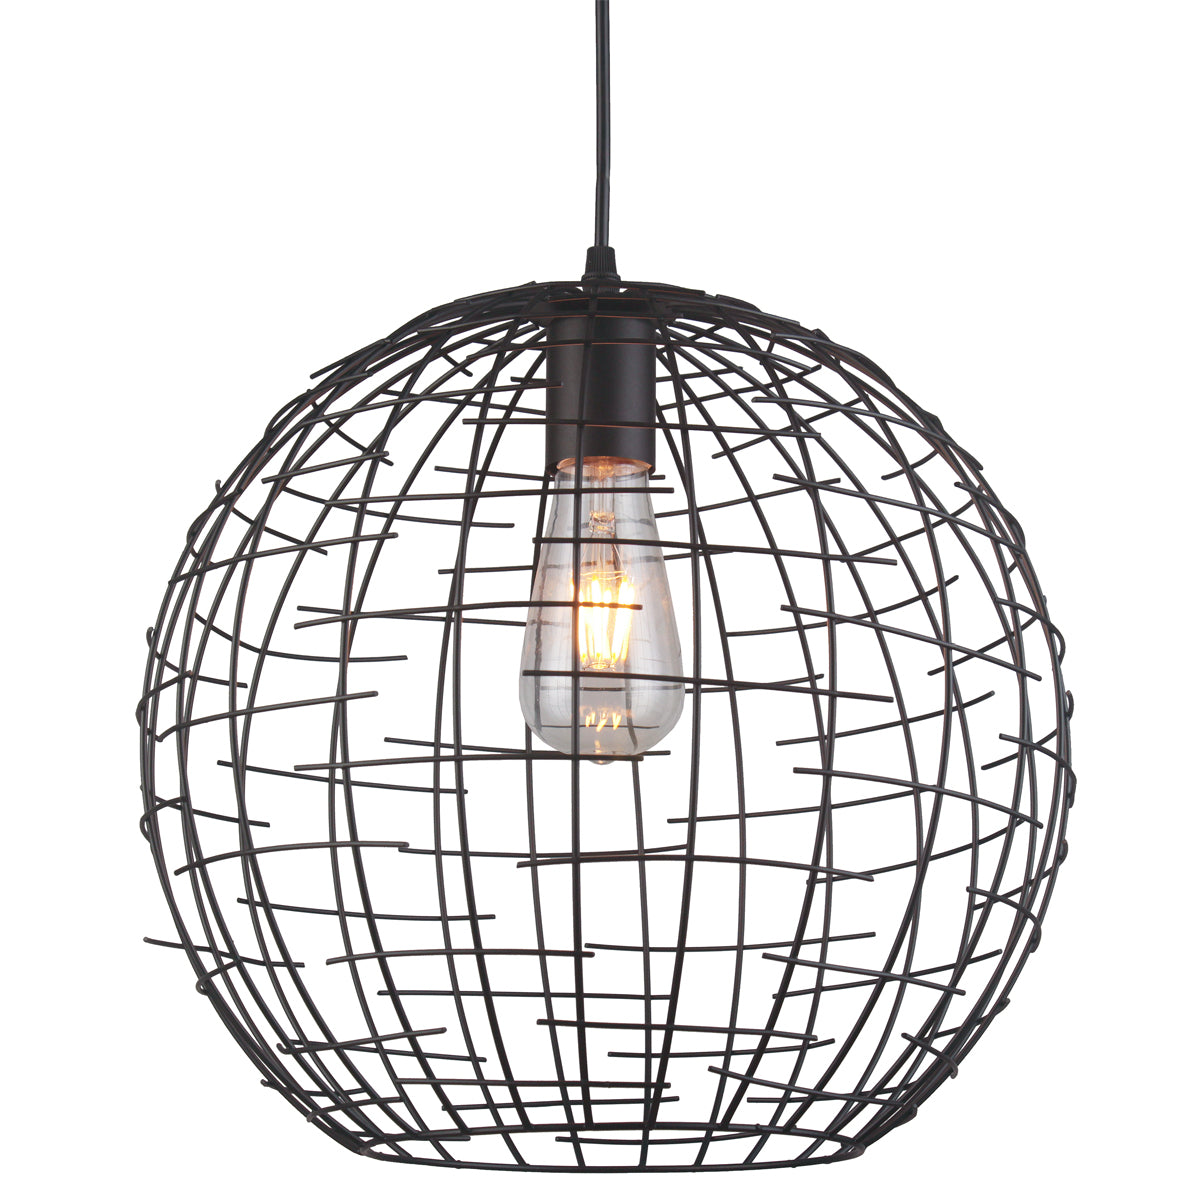 Our Edward pendant light features a round caged shade finished in matt black. A modern take on the vintage cage style that looks fantastic when teamed with a filament style lamp. Comes as a complete light fitting and the height can be adjusted at the time of fitting.